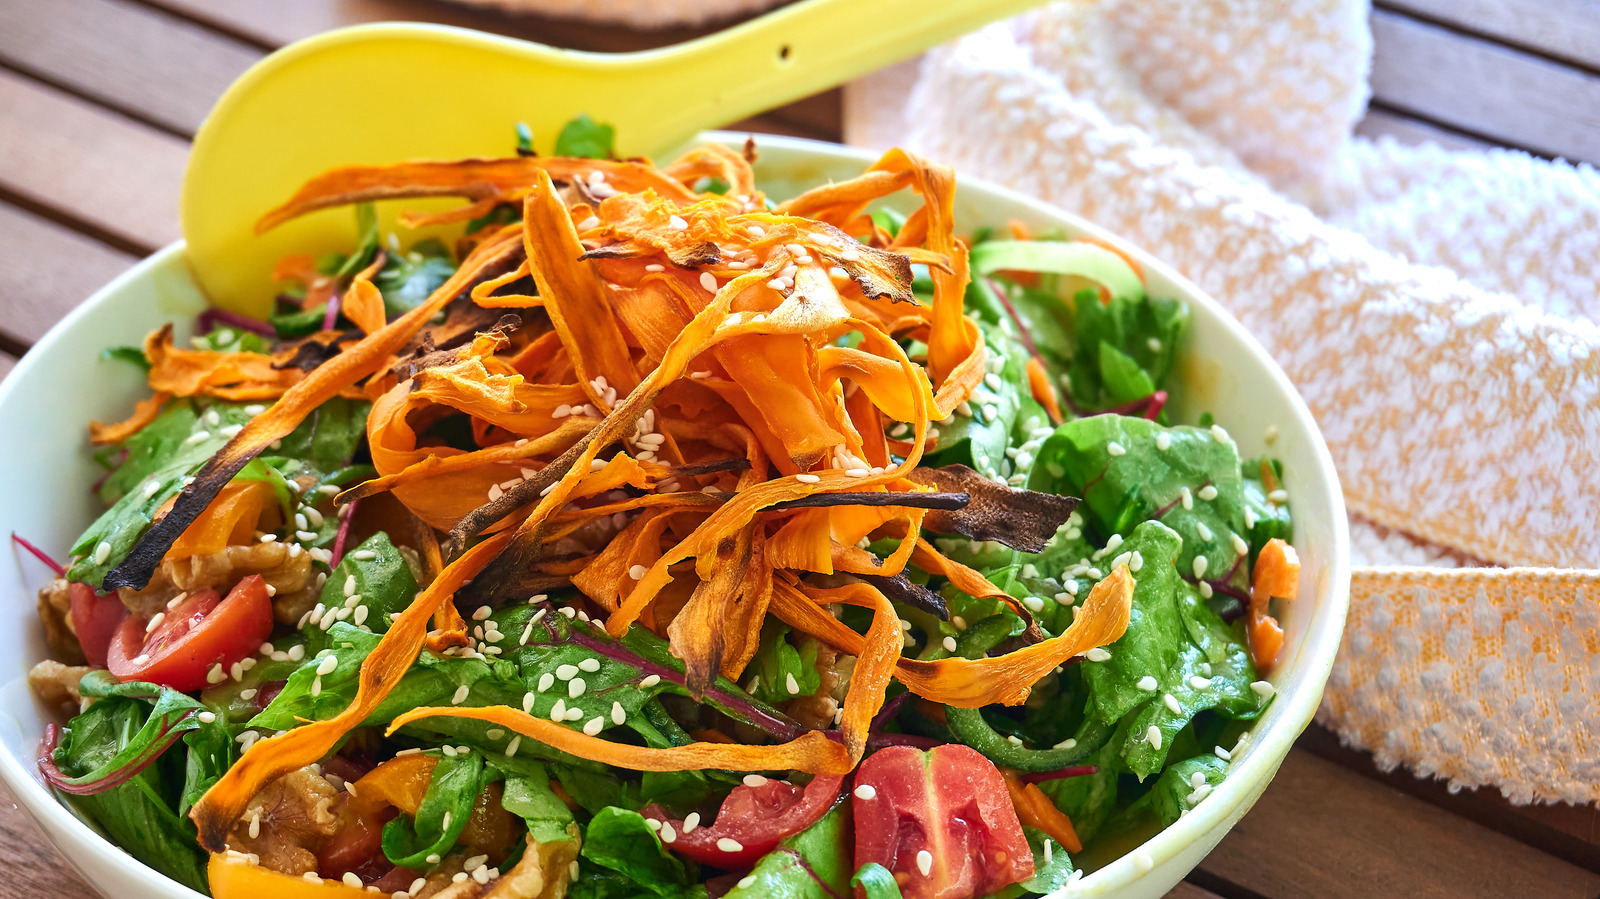 The 9 Best Fast Food Salads